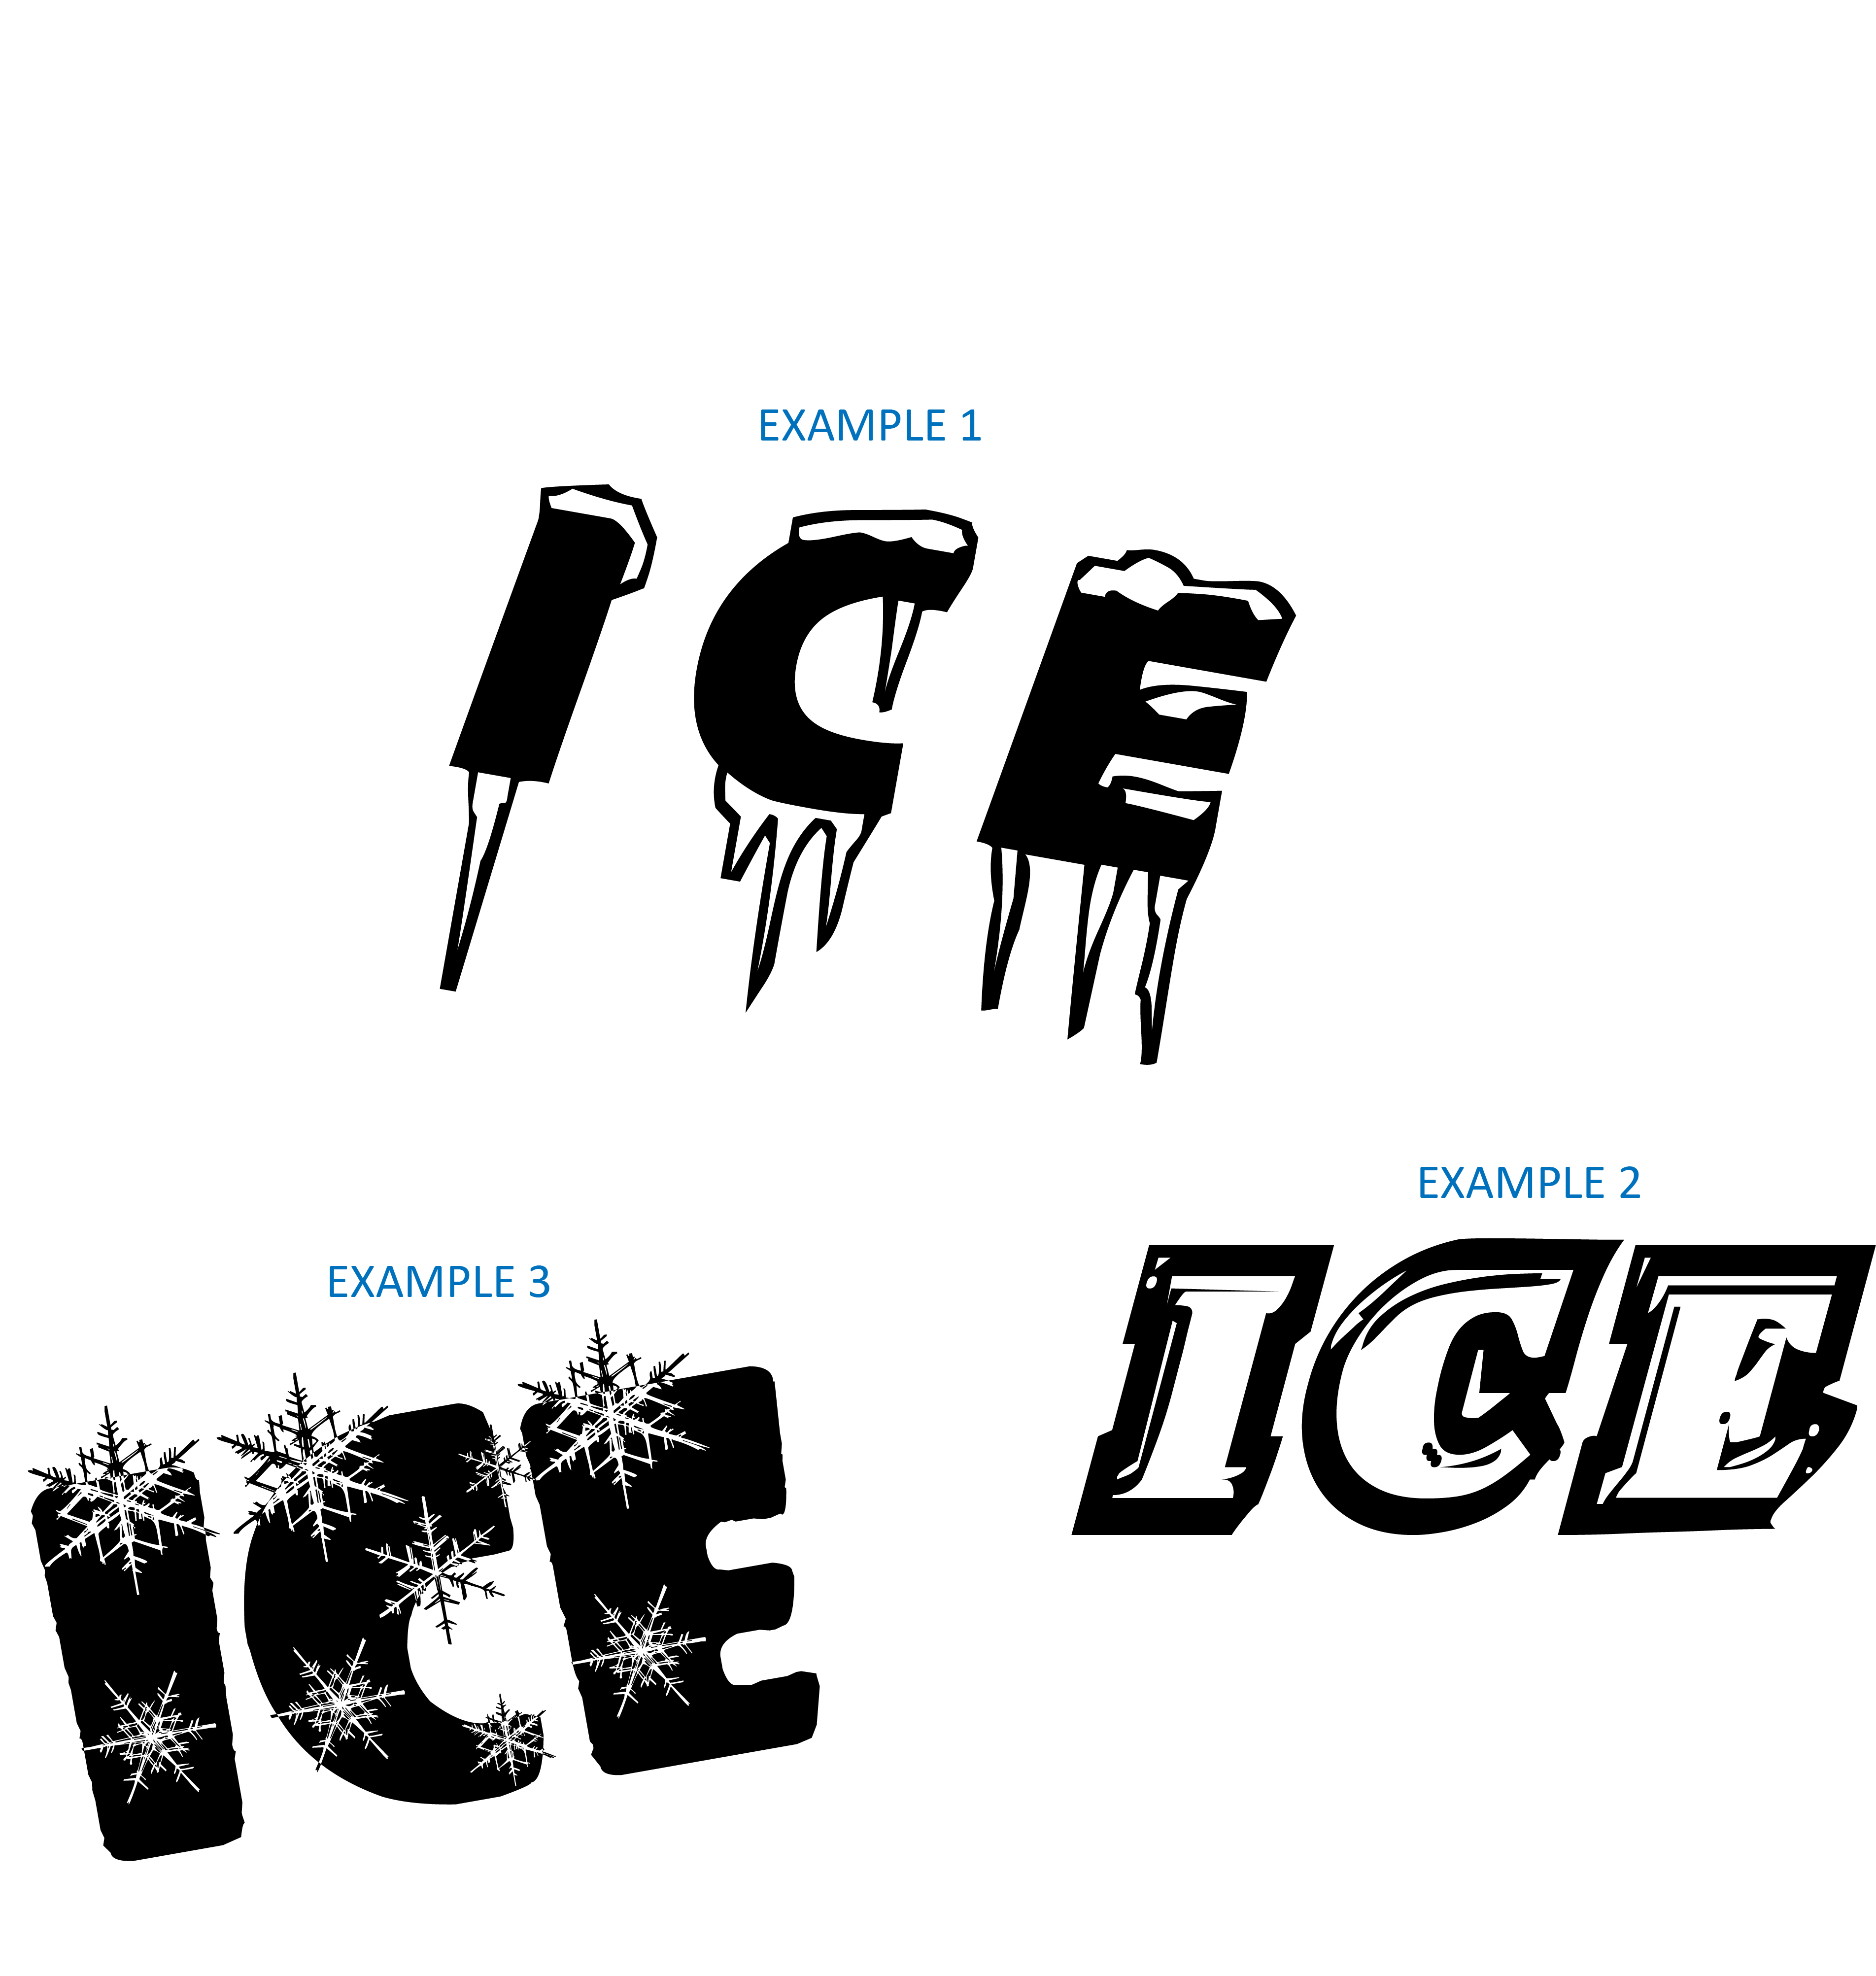 17 The Word On It With Ice Or Snow Cold Fonts Images - Embroidery ...